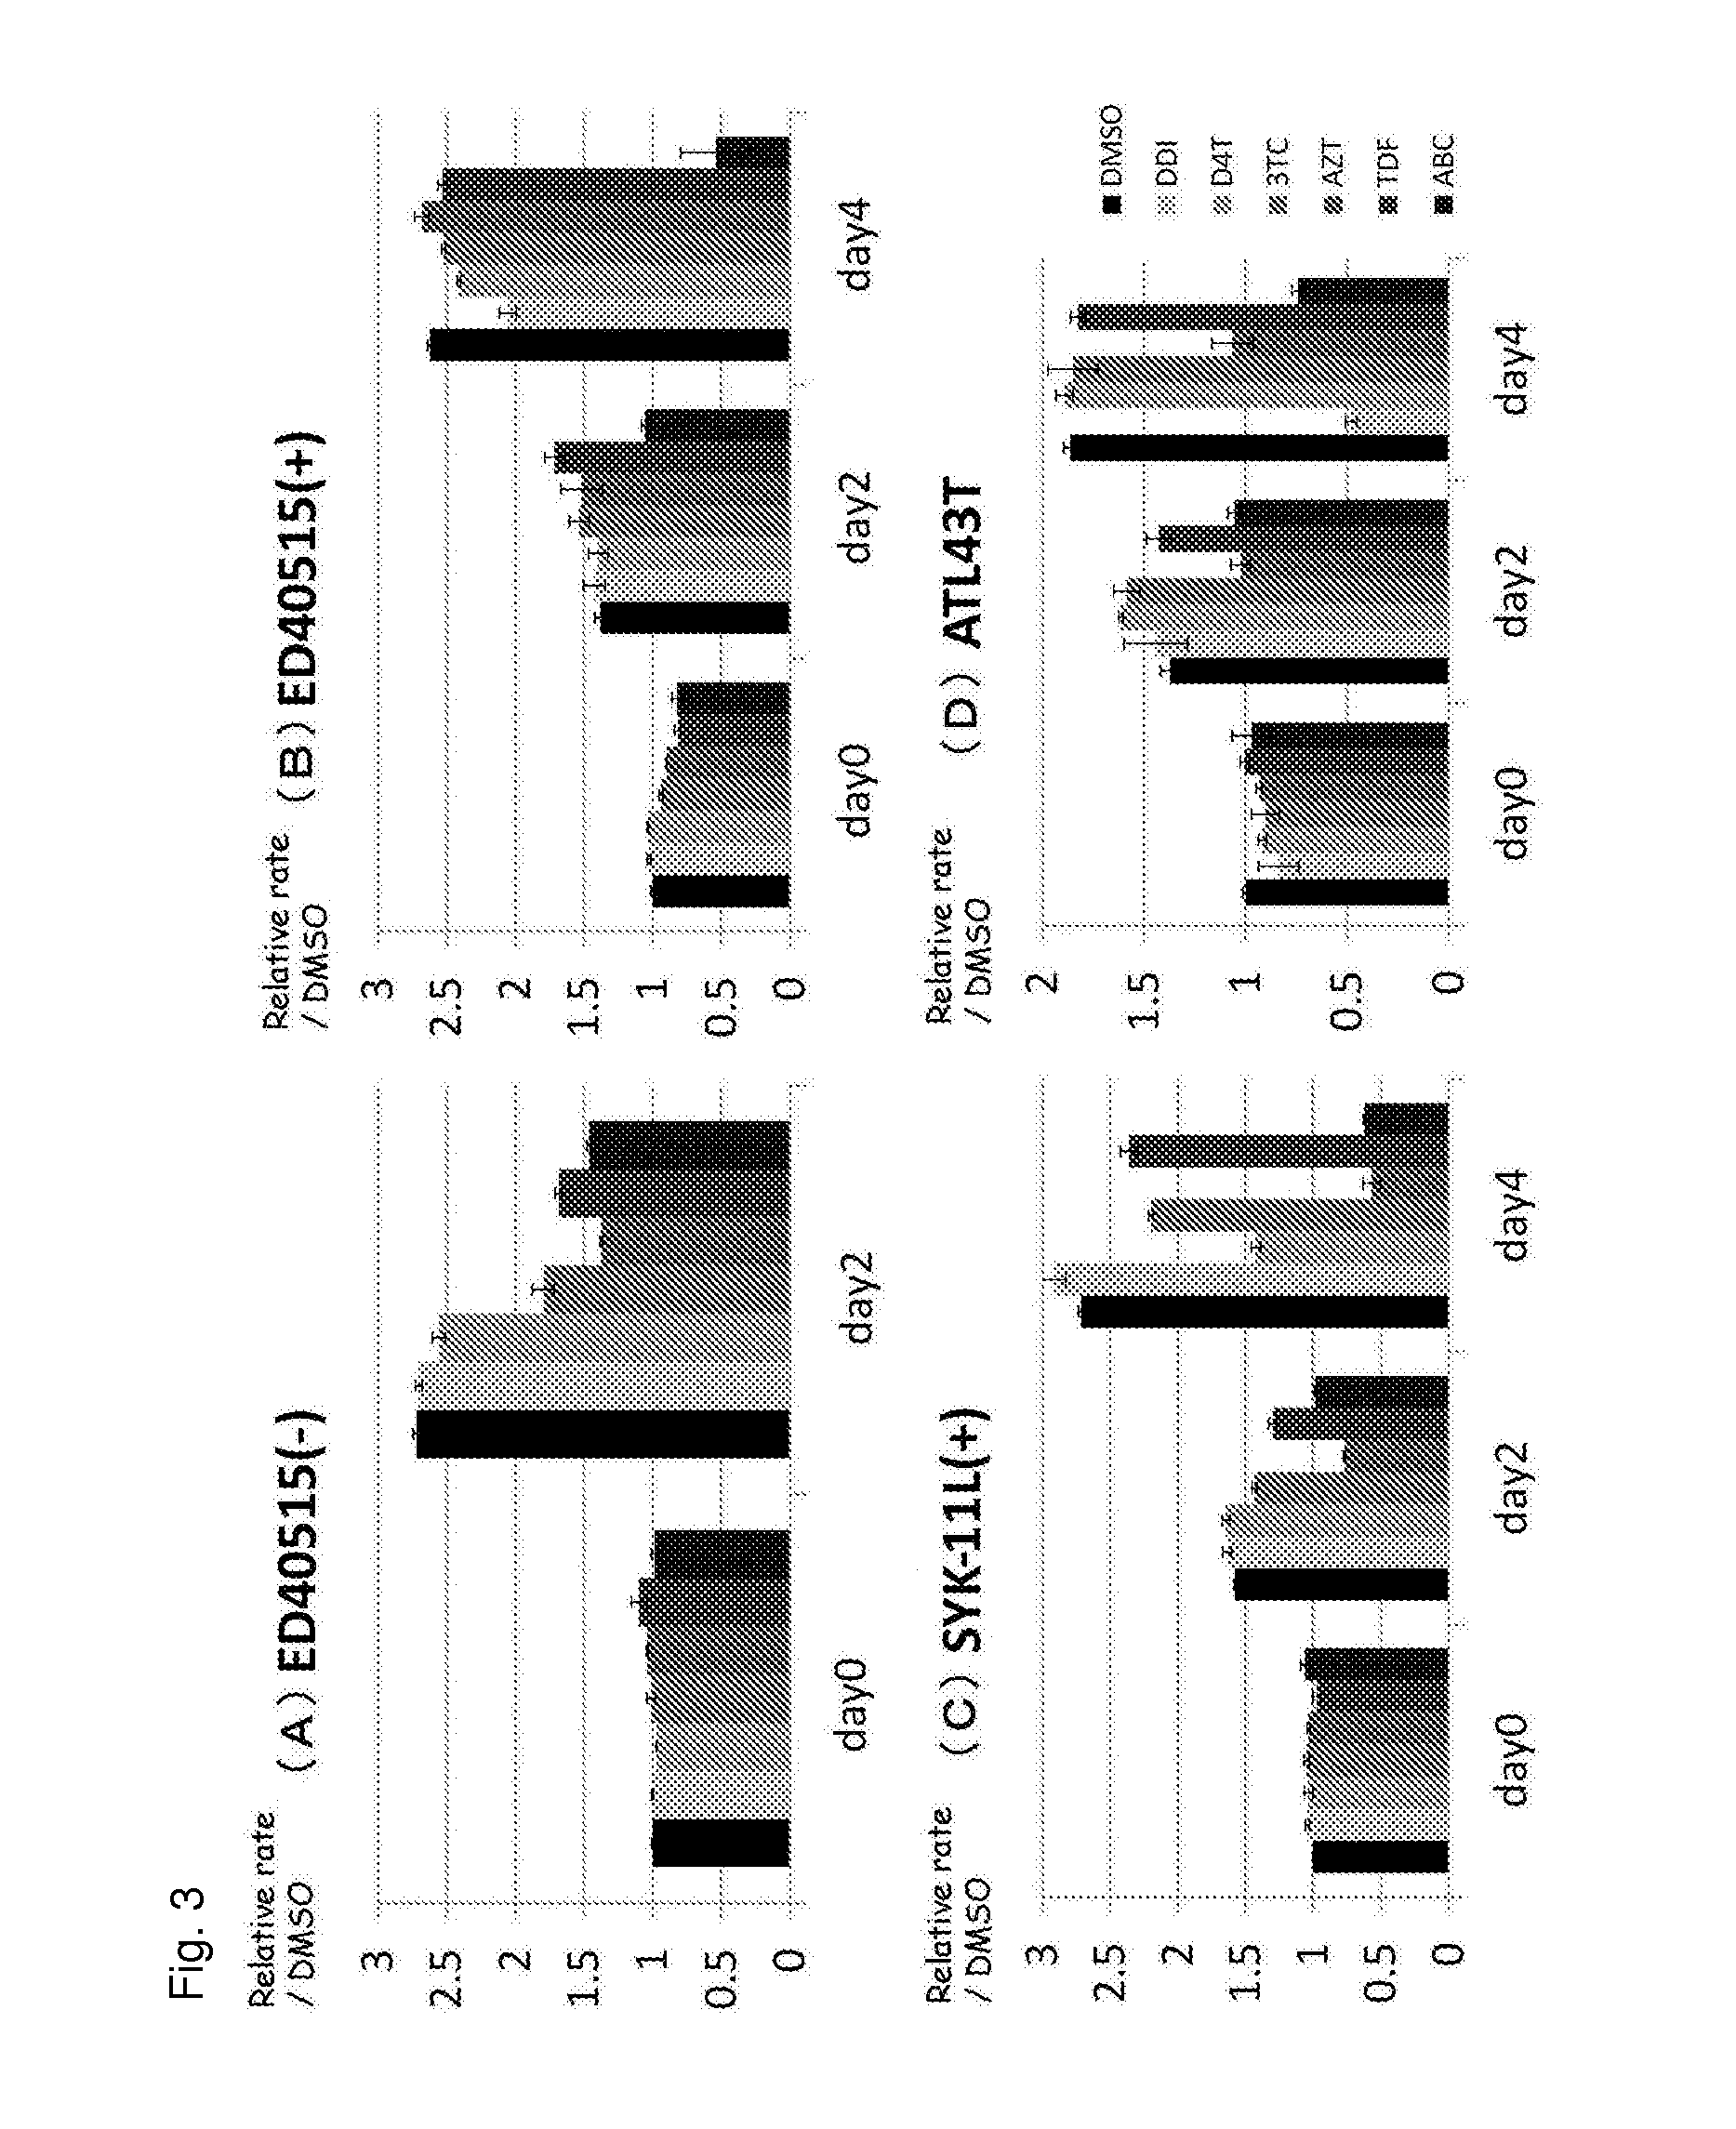 Pharmaceutical composition for use in prevention or treatment of cancer